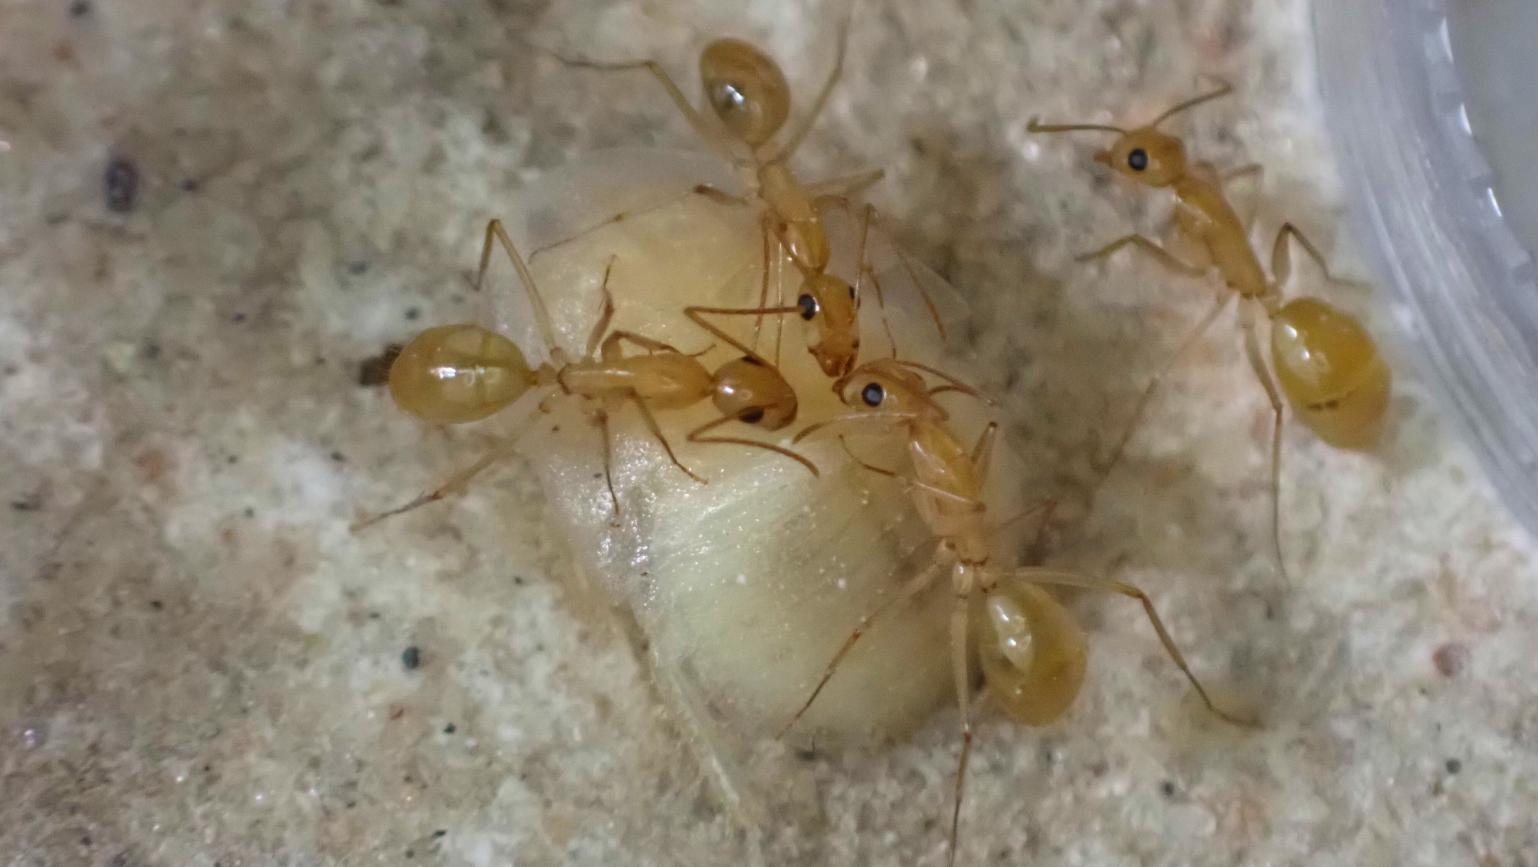 Camponotus fragilis drinking from a roach